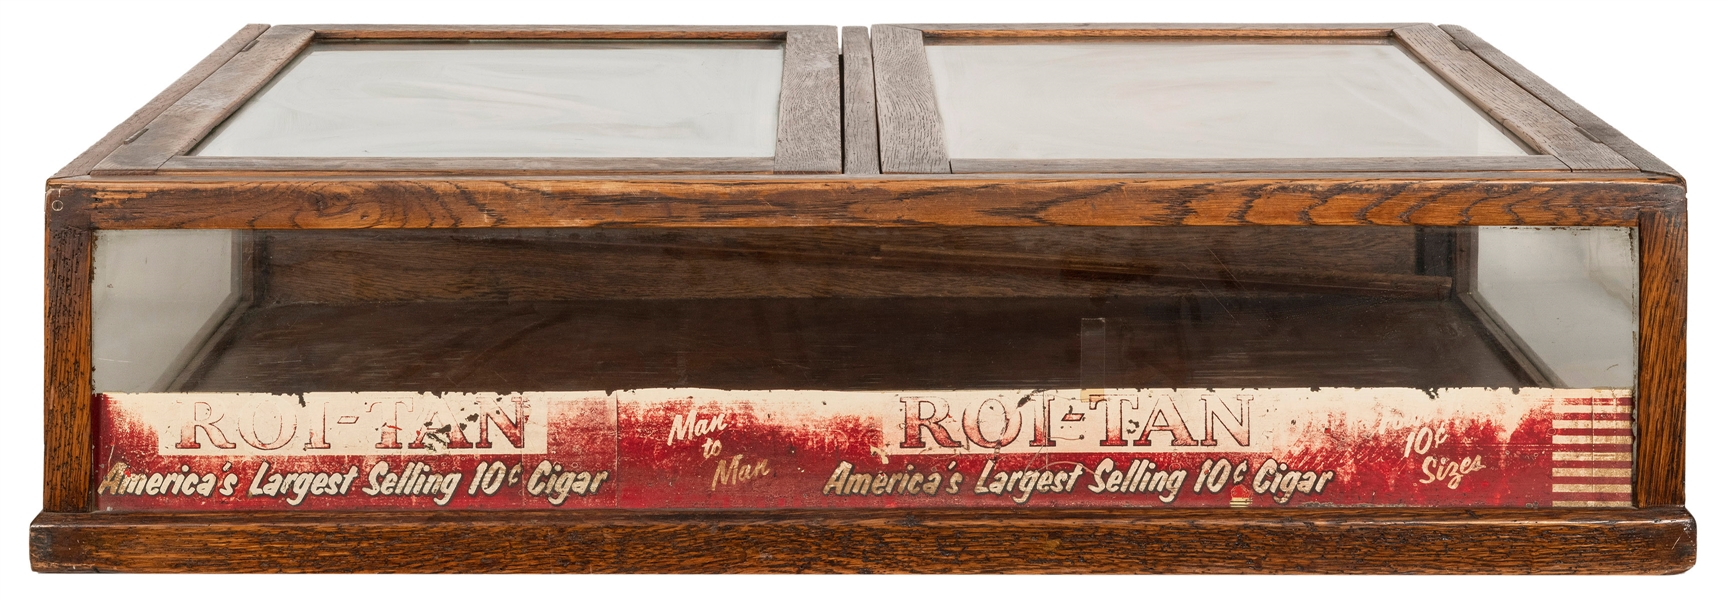  Roi-Tan Cigars Countertop Display Case. Wood frame with vin...